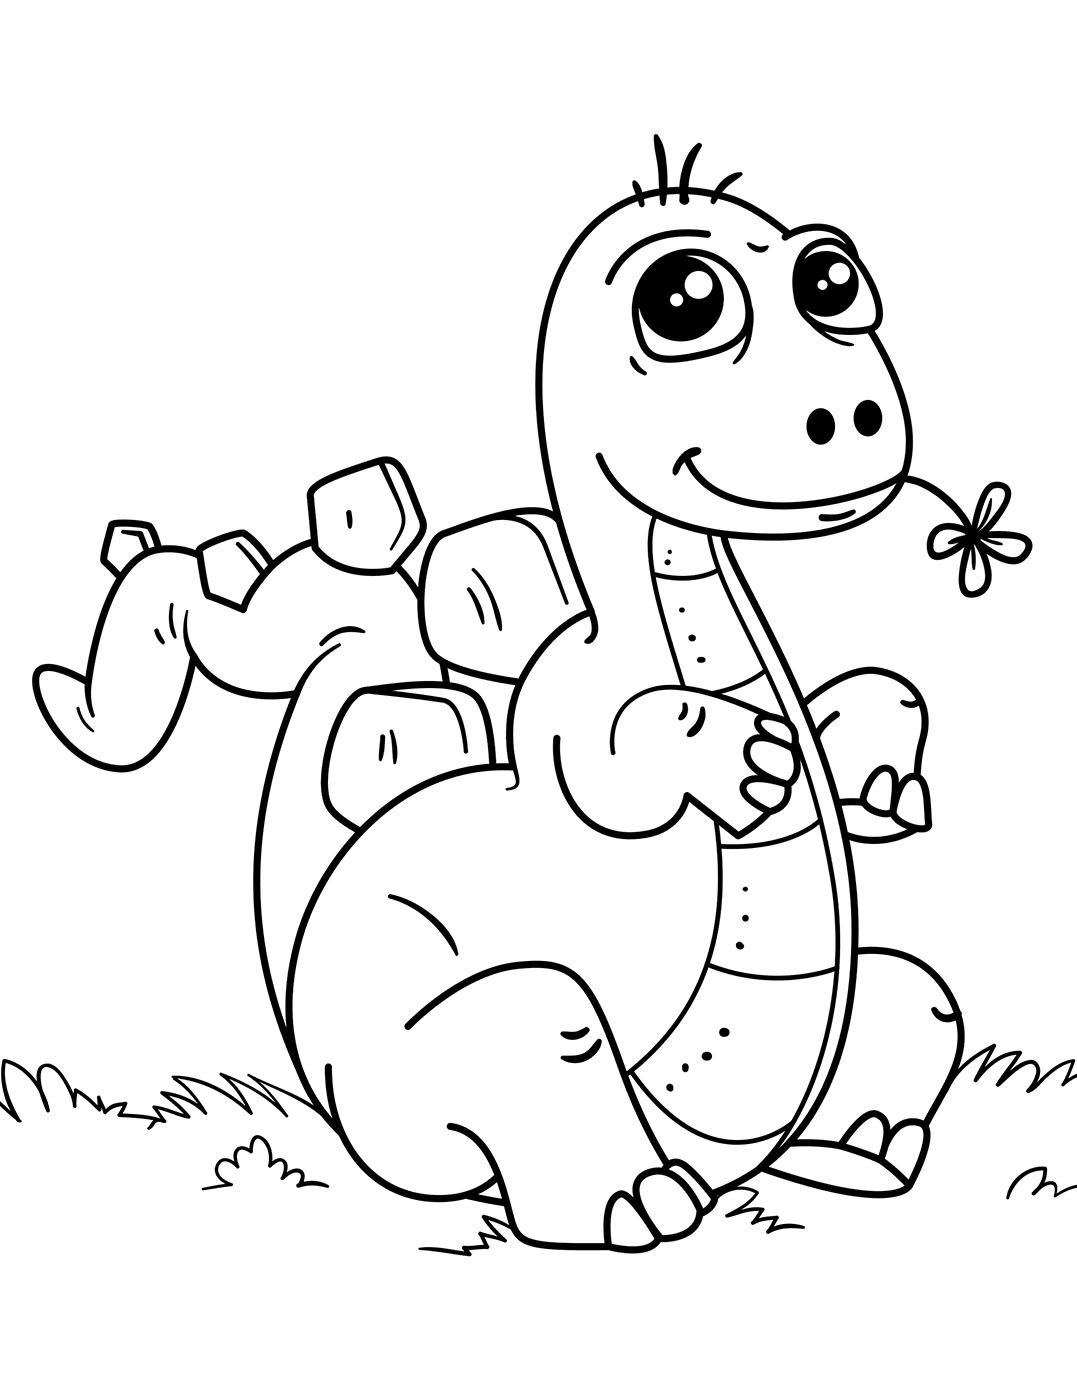 coloring-for-kids-dino-dinosaurs-to-download-for-free-brachiosaurus